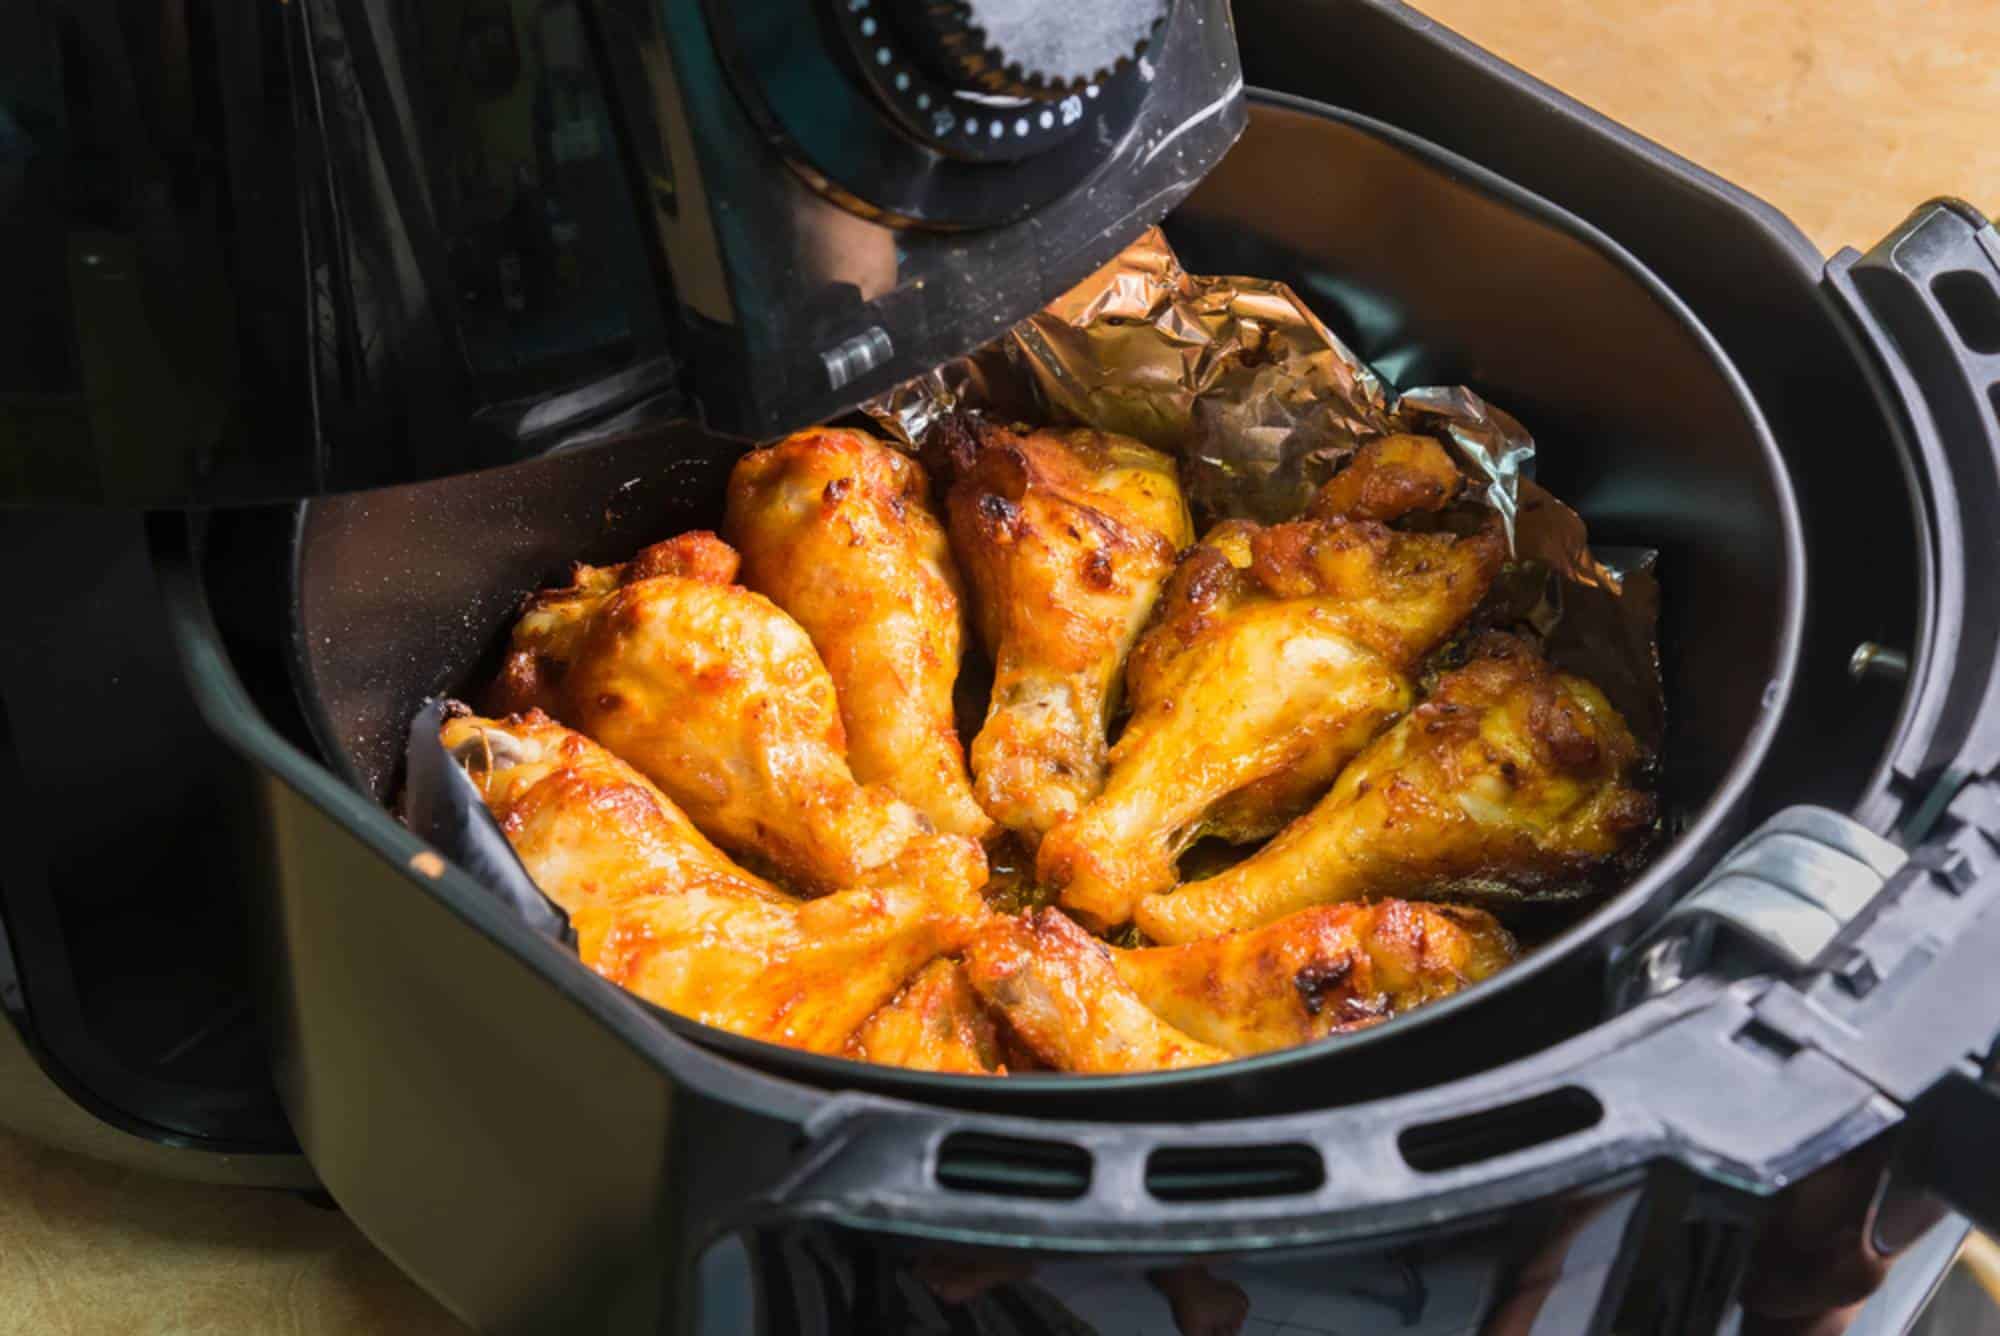 what can you cook in an air fryer